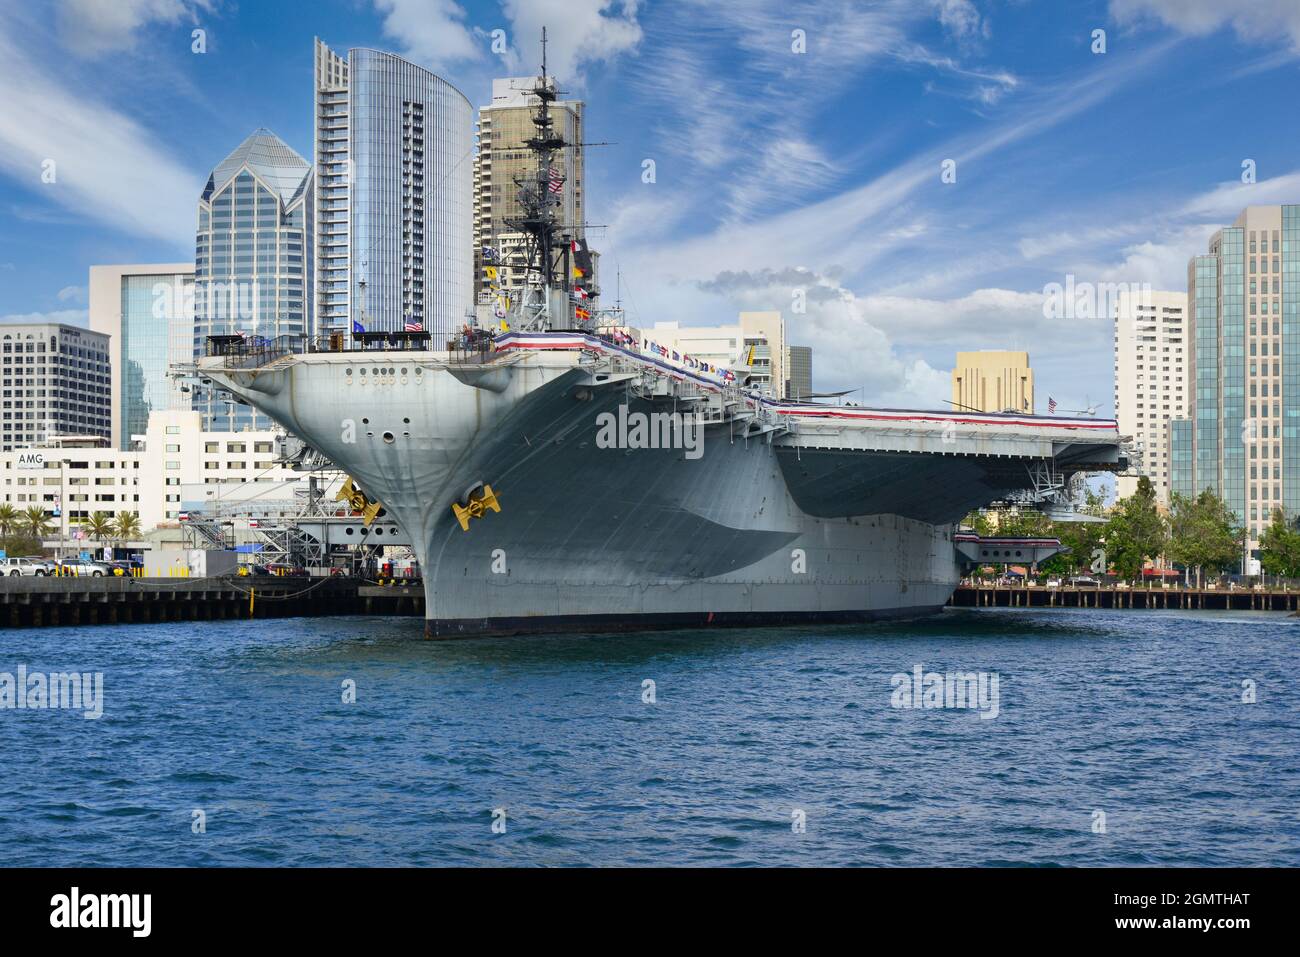 The USS Midway, the historical aircraft carrier battleship, now a museum,  at the San Diego Harbor with downtown San Diego skyline in background Stock Photo